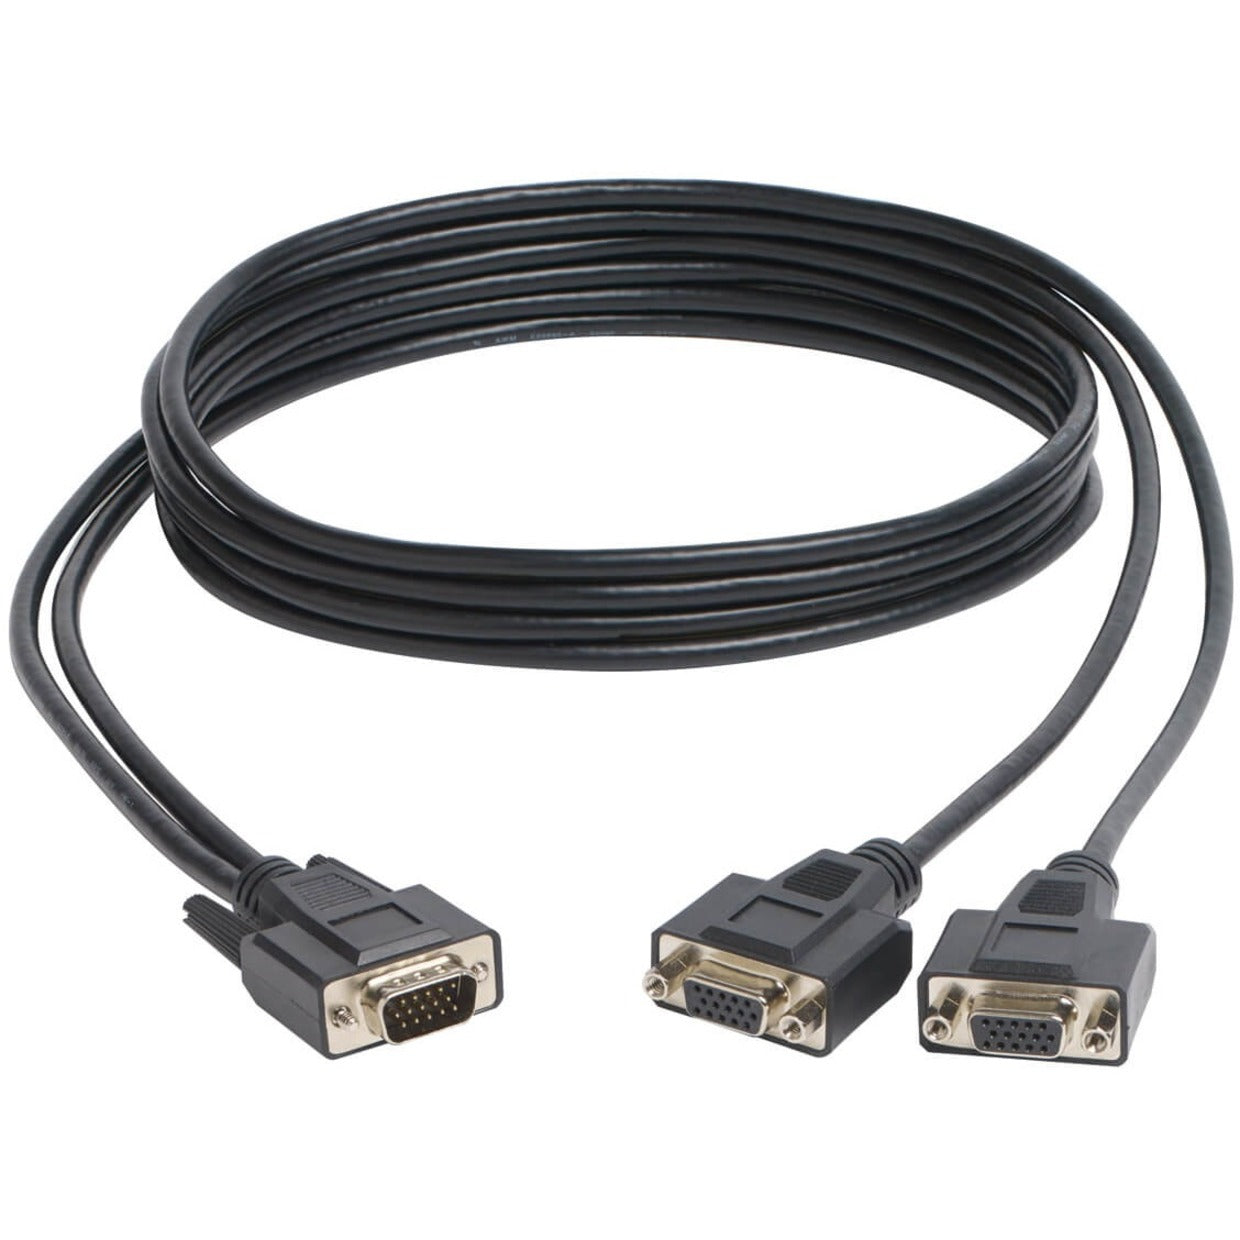 Tripp Lite P516-006-HR High Resolution VGA Monitor Y Splitter Cable, 6-ft, Molded, Shielded, 1600 x 1200 Supported Resolution